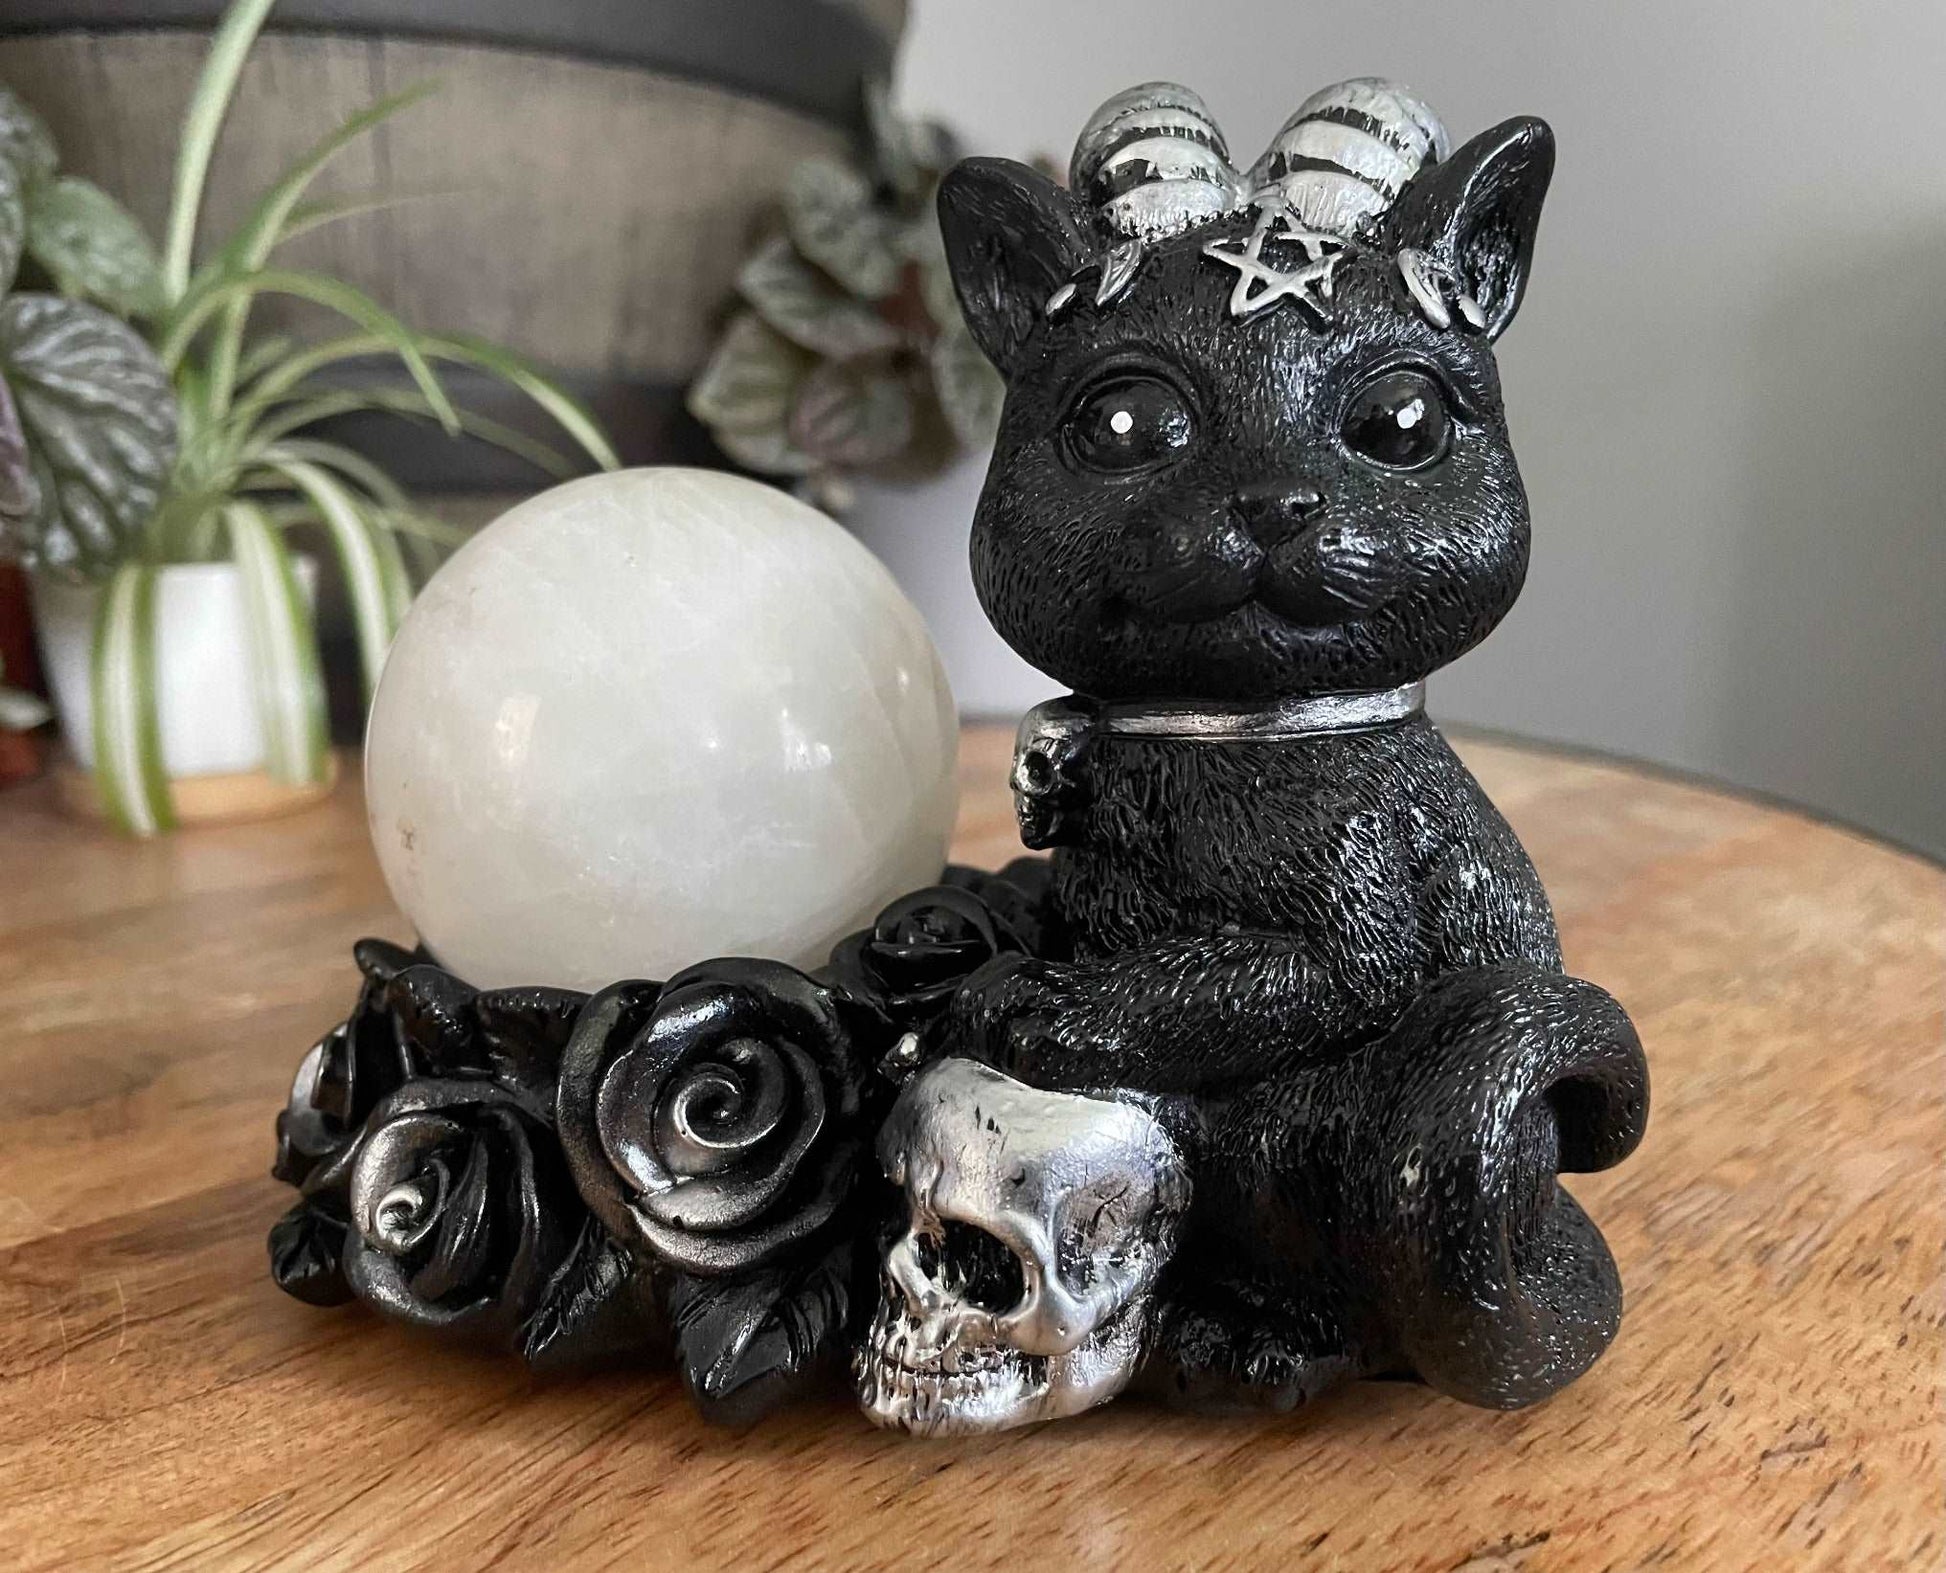 Pictured is a sphere stand of a black cat with horns sitting next to some silver and black roses and a silver skull.